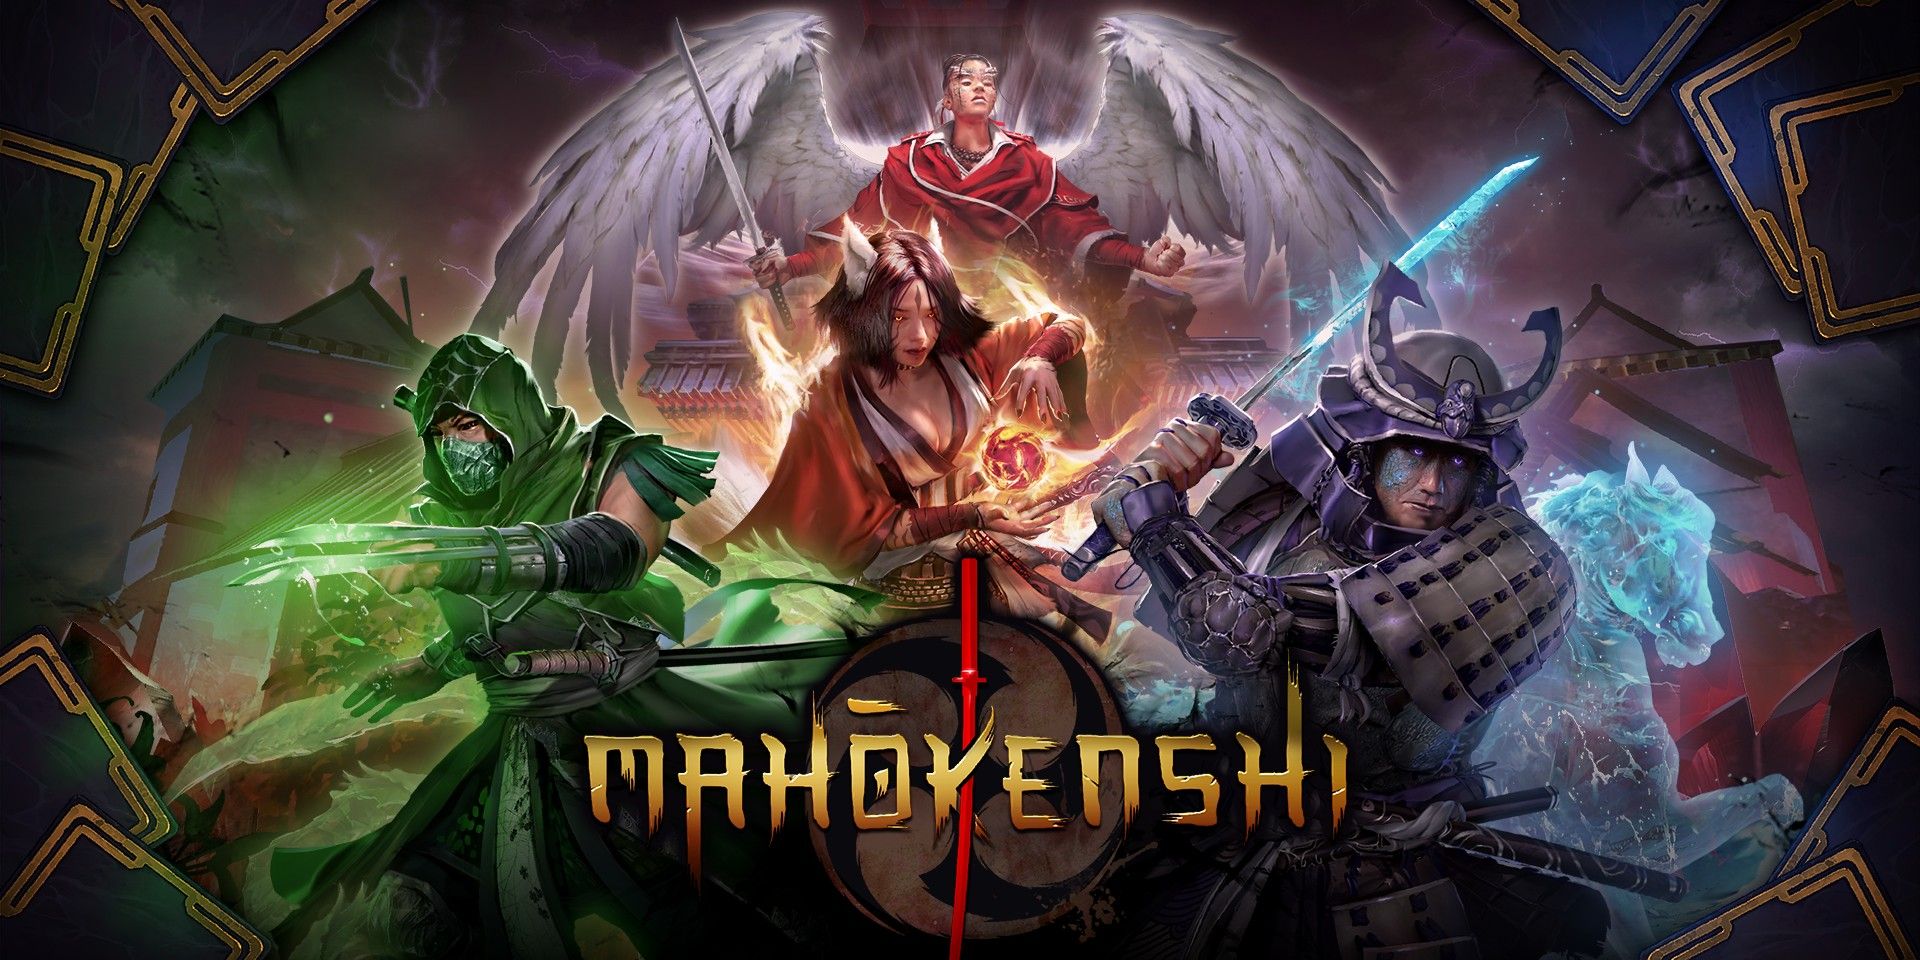 Mahokenshi Key Art showing four mystical samurai surrounded by new cards.